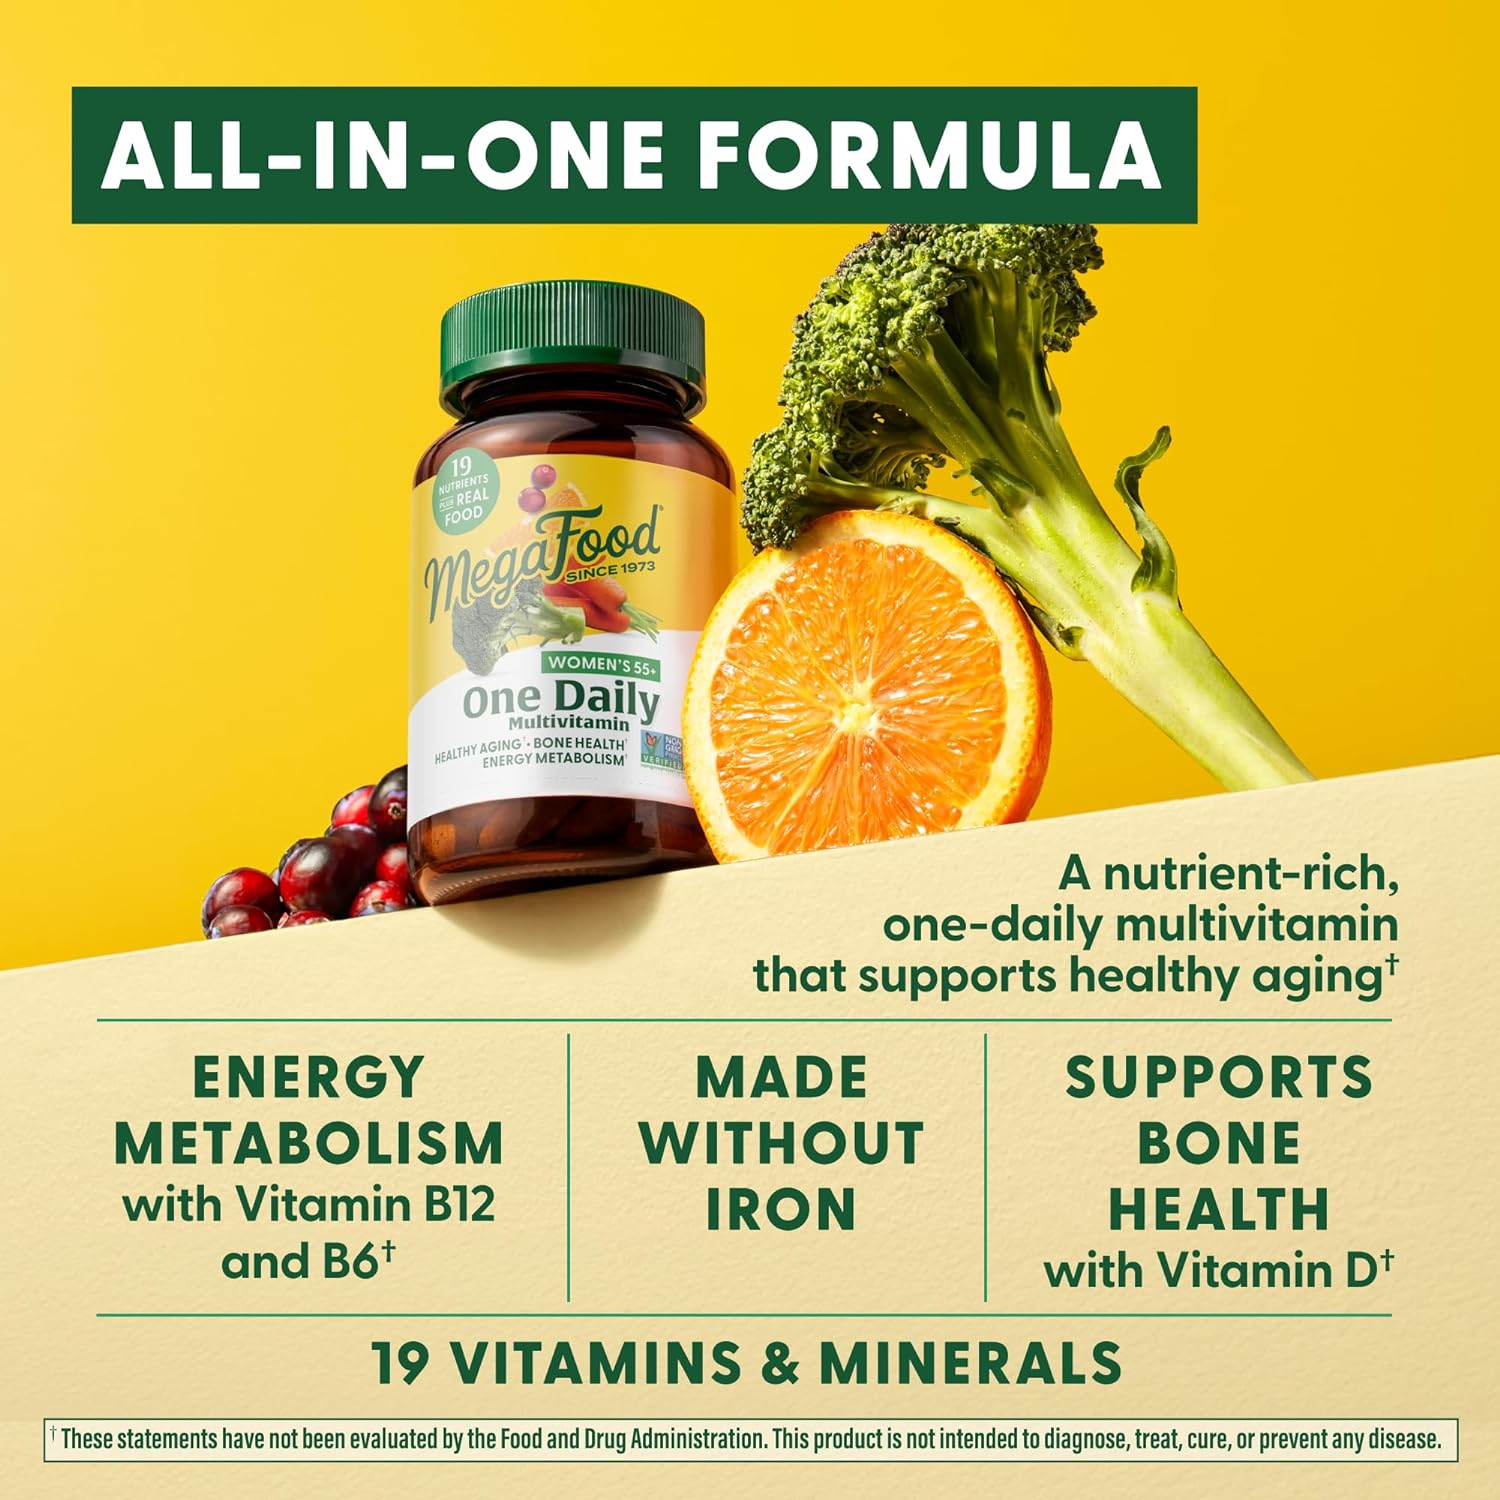 MegaFood Women's 55+ One Daily Multivitamin for Women with Vitamin A, Vitamin C & Vitamin E for optimal aging support - Plus Real Food - Bone & Immune Support Supplement - Vegetarian - 120 Tabs : Health & Household